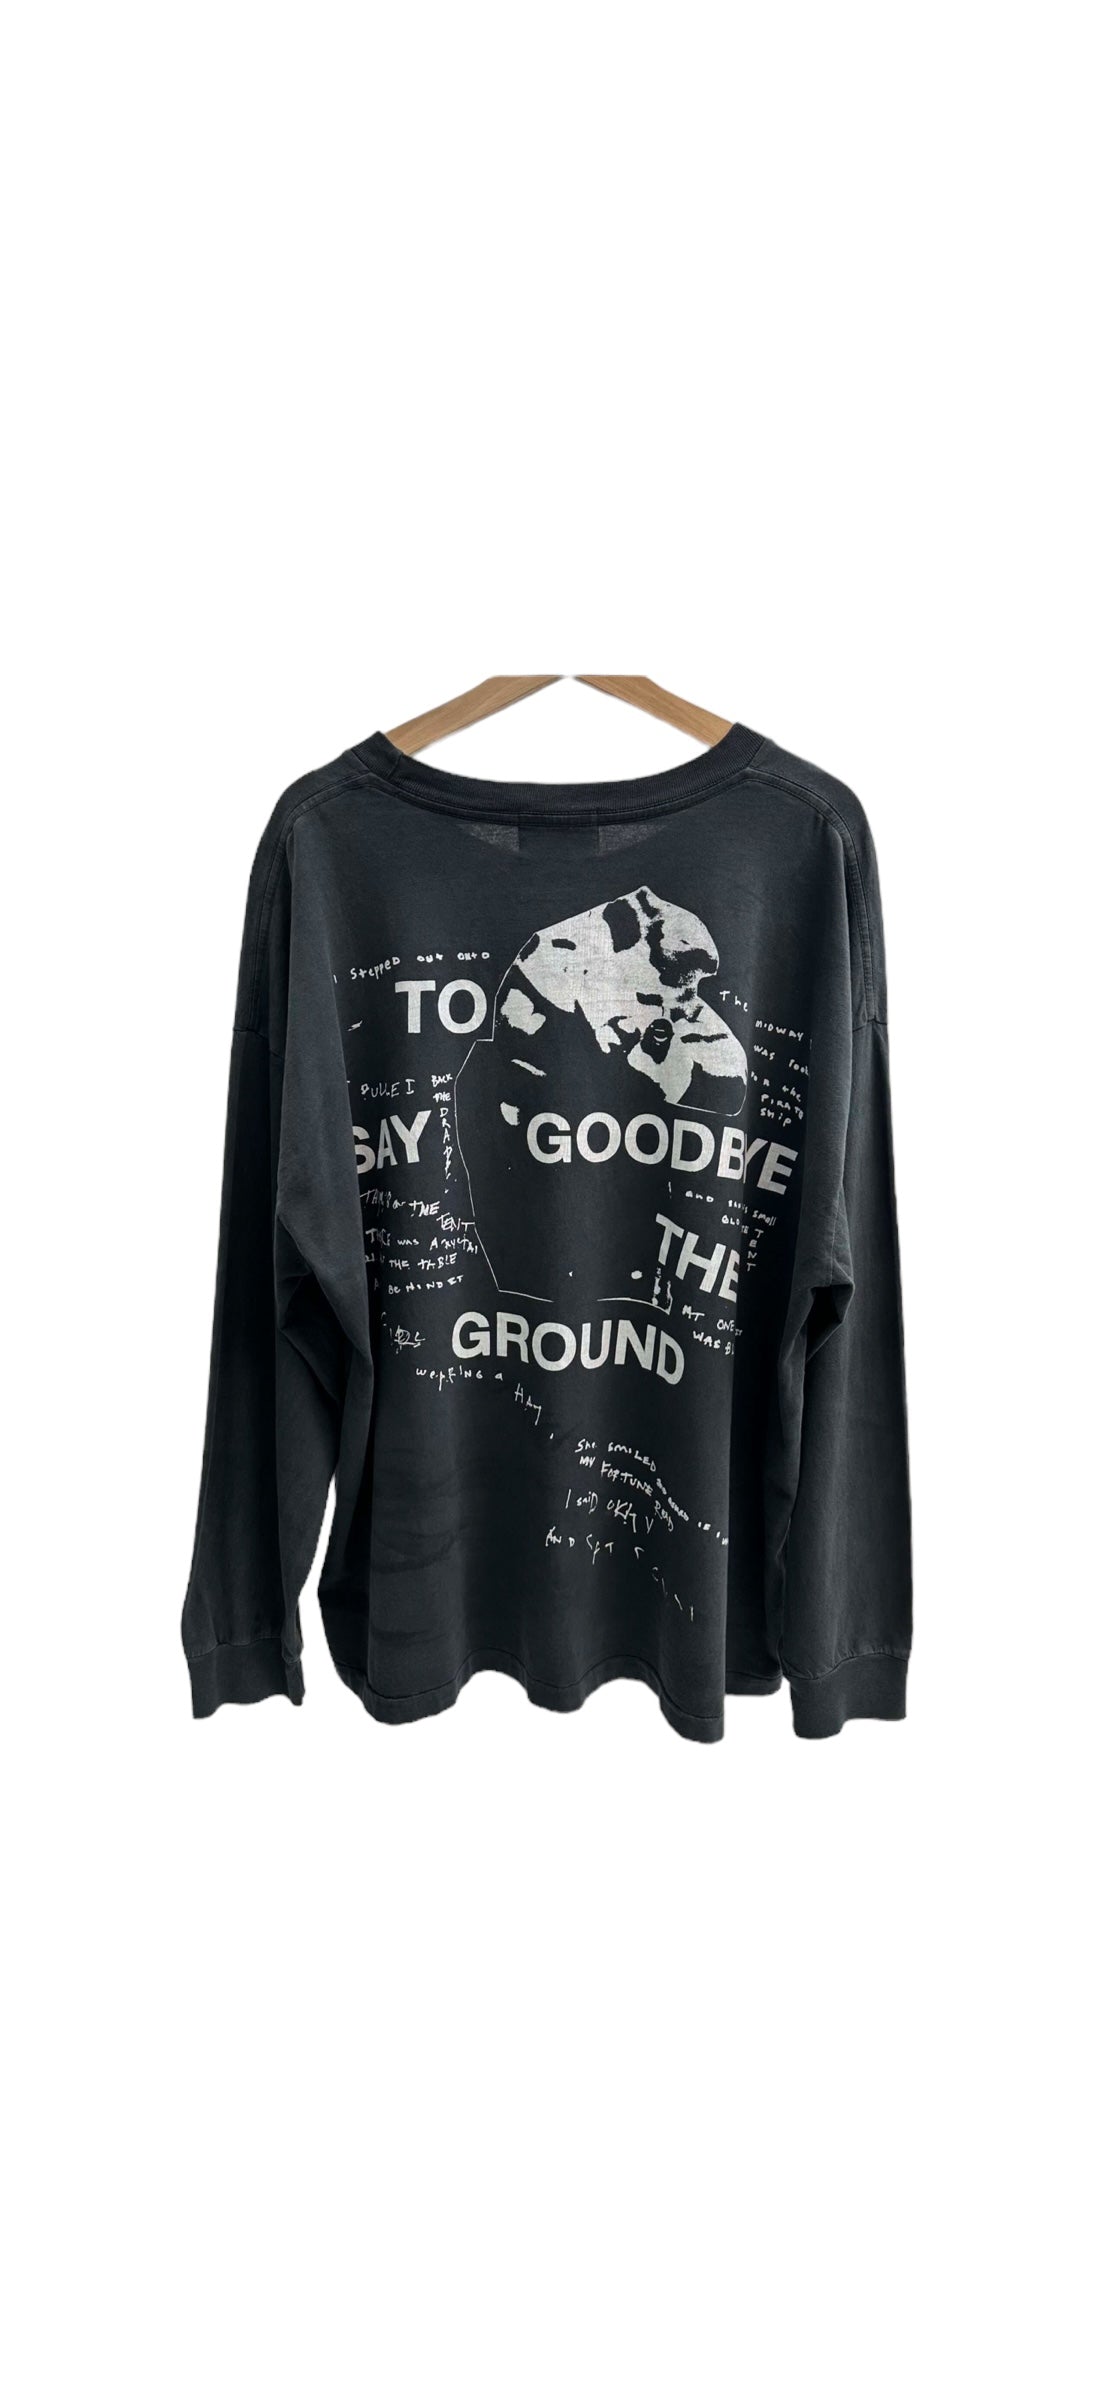 Enfants Riches Déprimés To Say Goodbye To The Ground Long Sleeve 